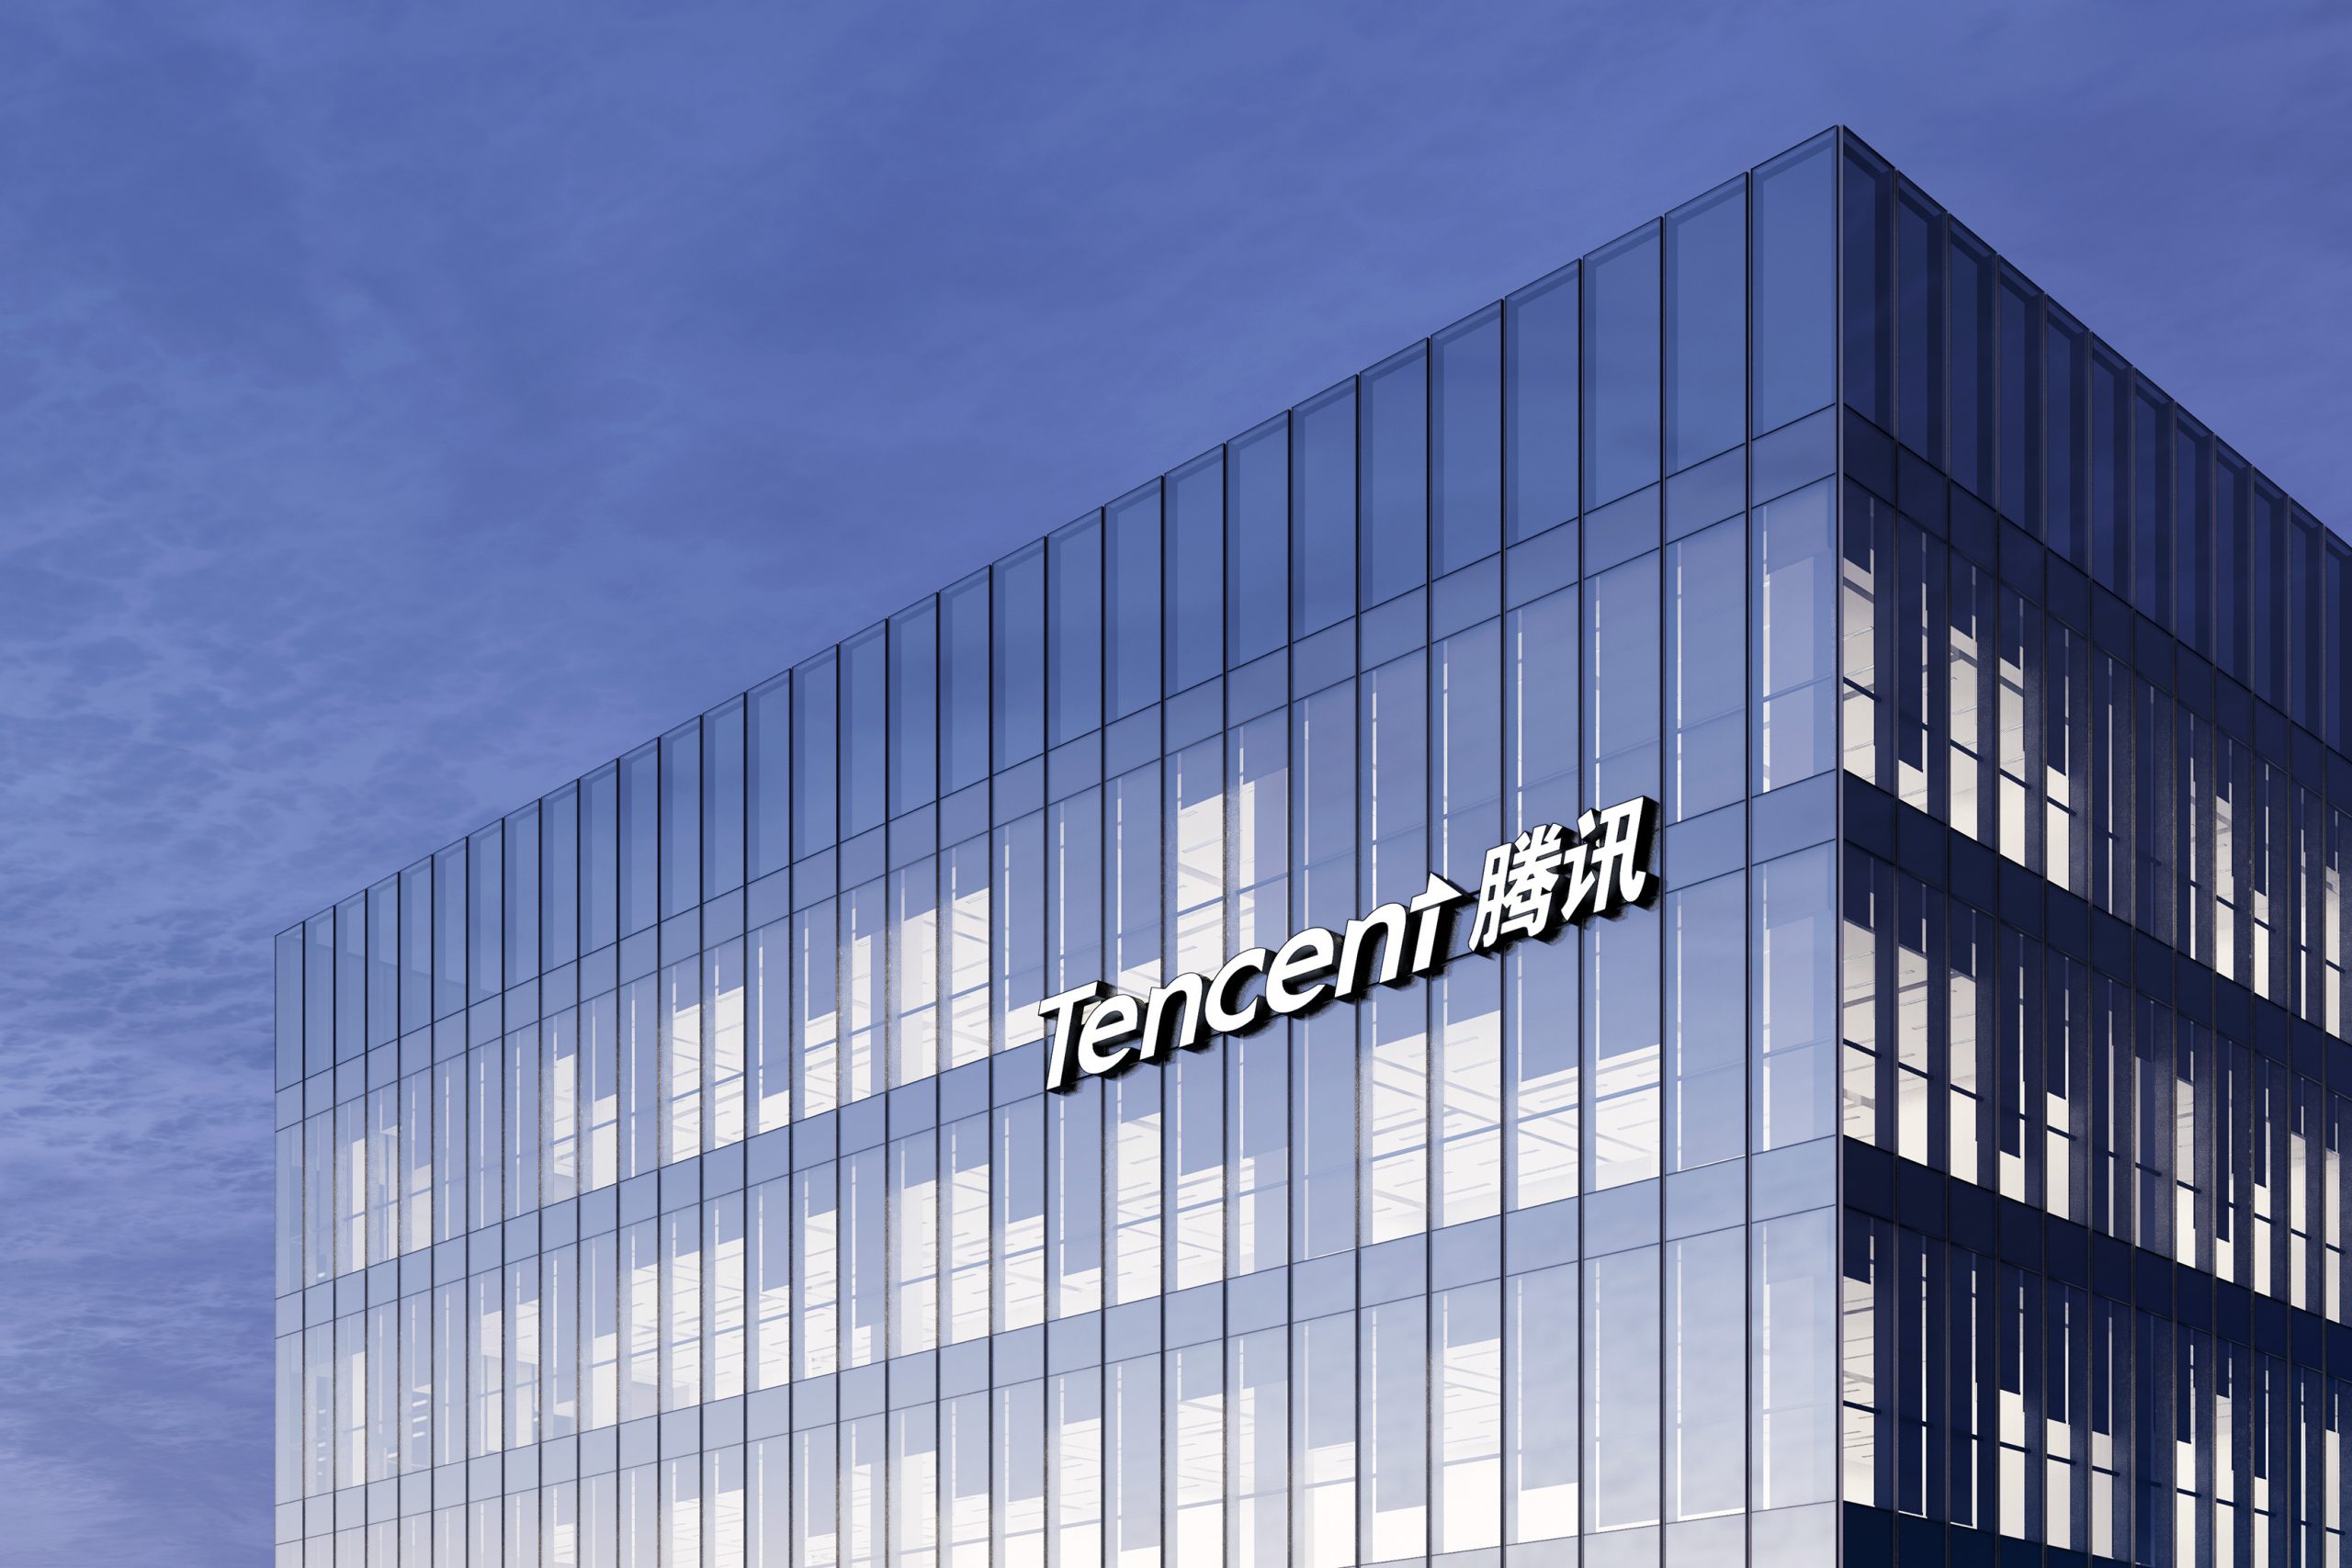 Tencent’s Pony Ma strikes confident tone at annual meeting despite multiple challenges  · TechNode #chicomnews